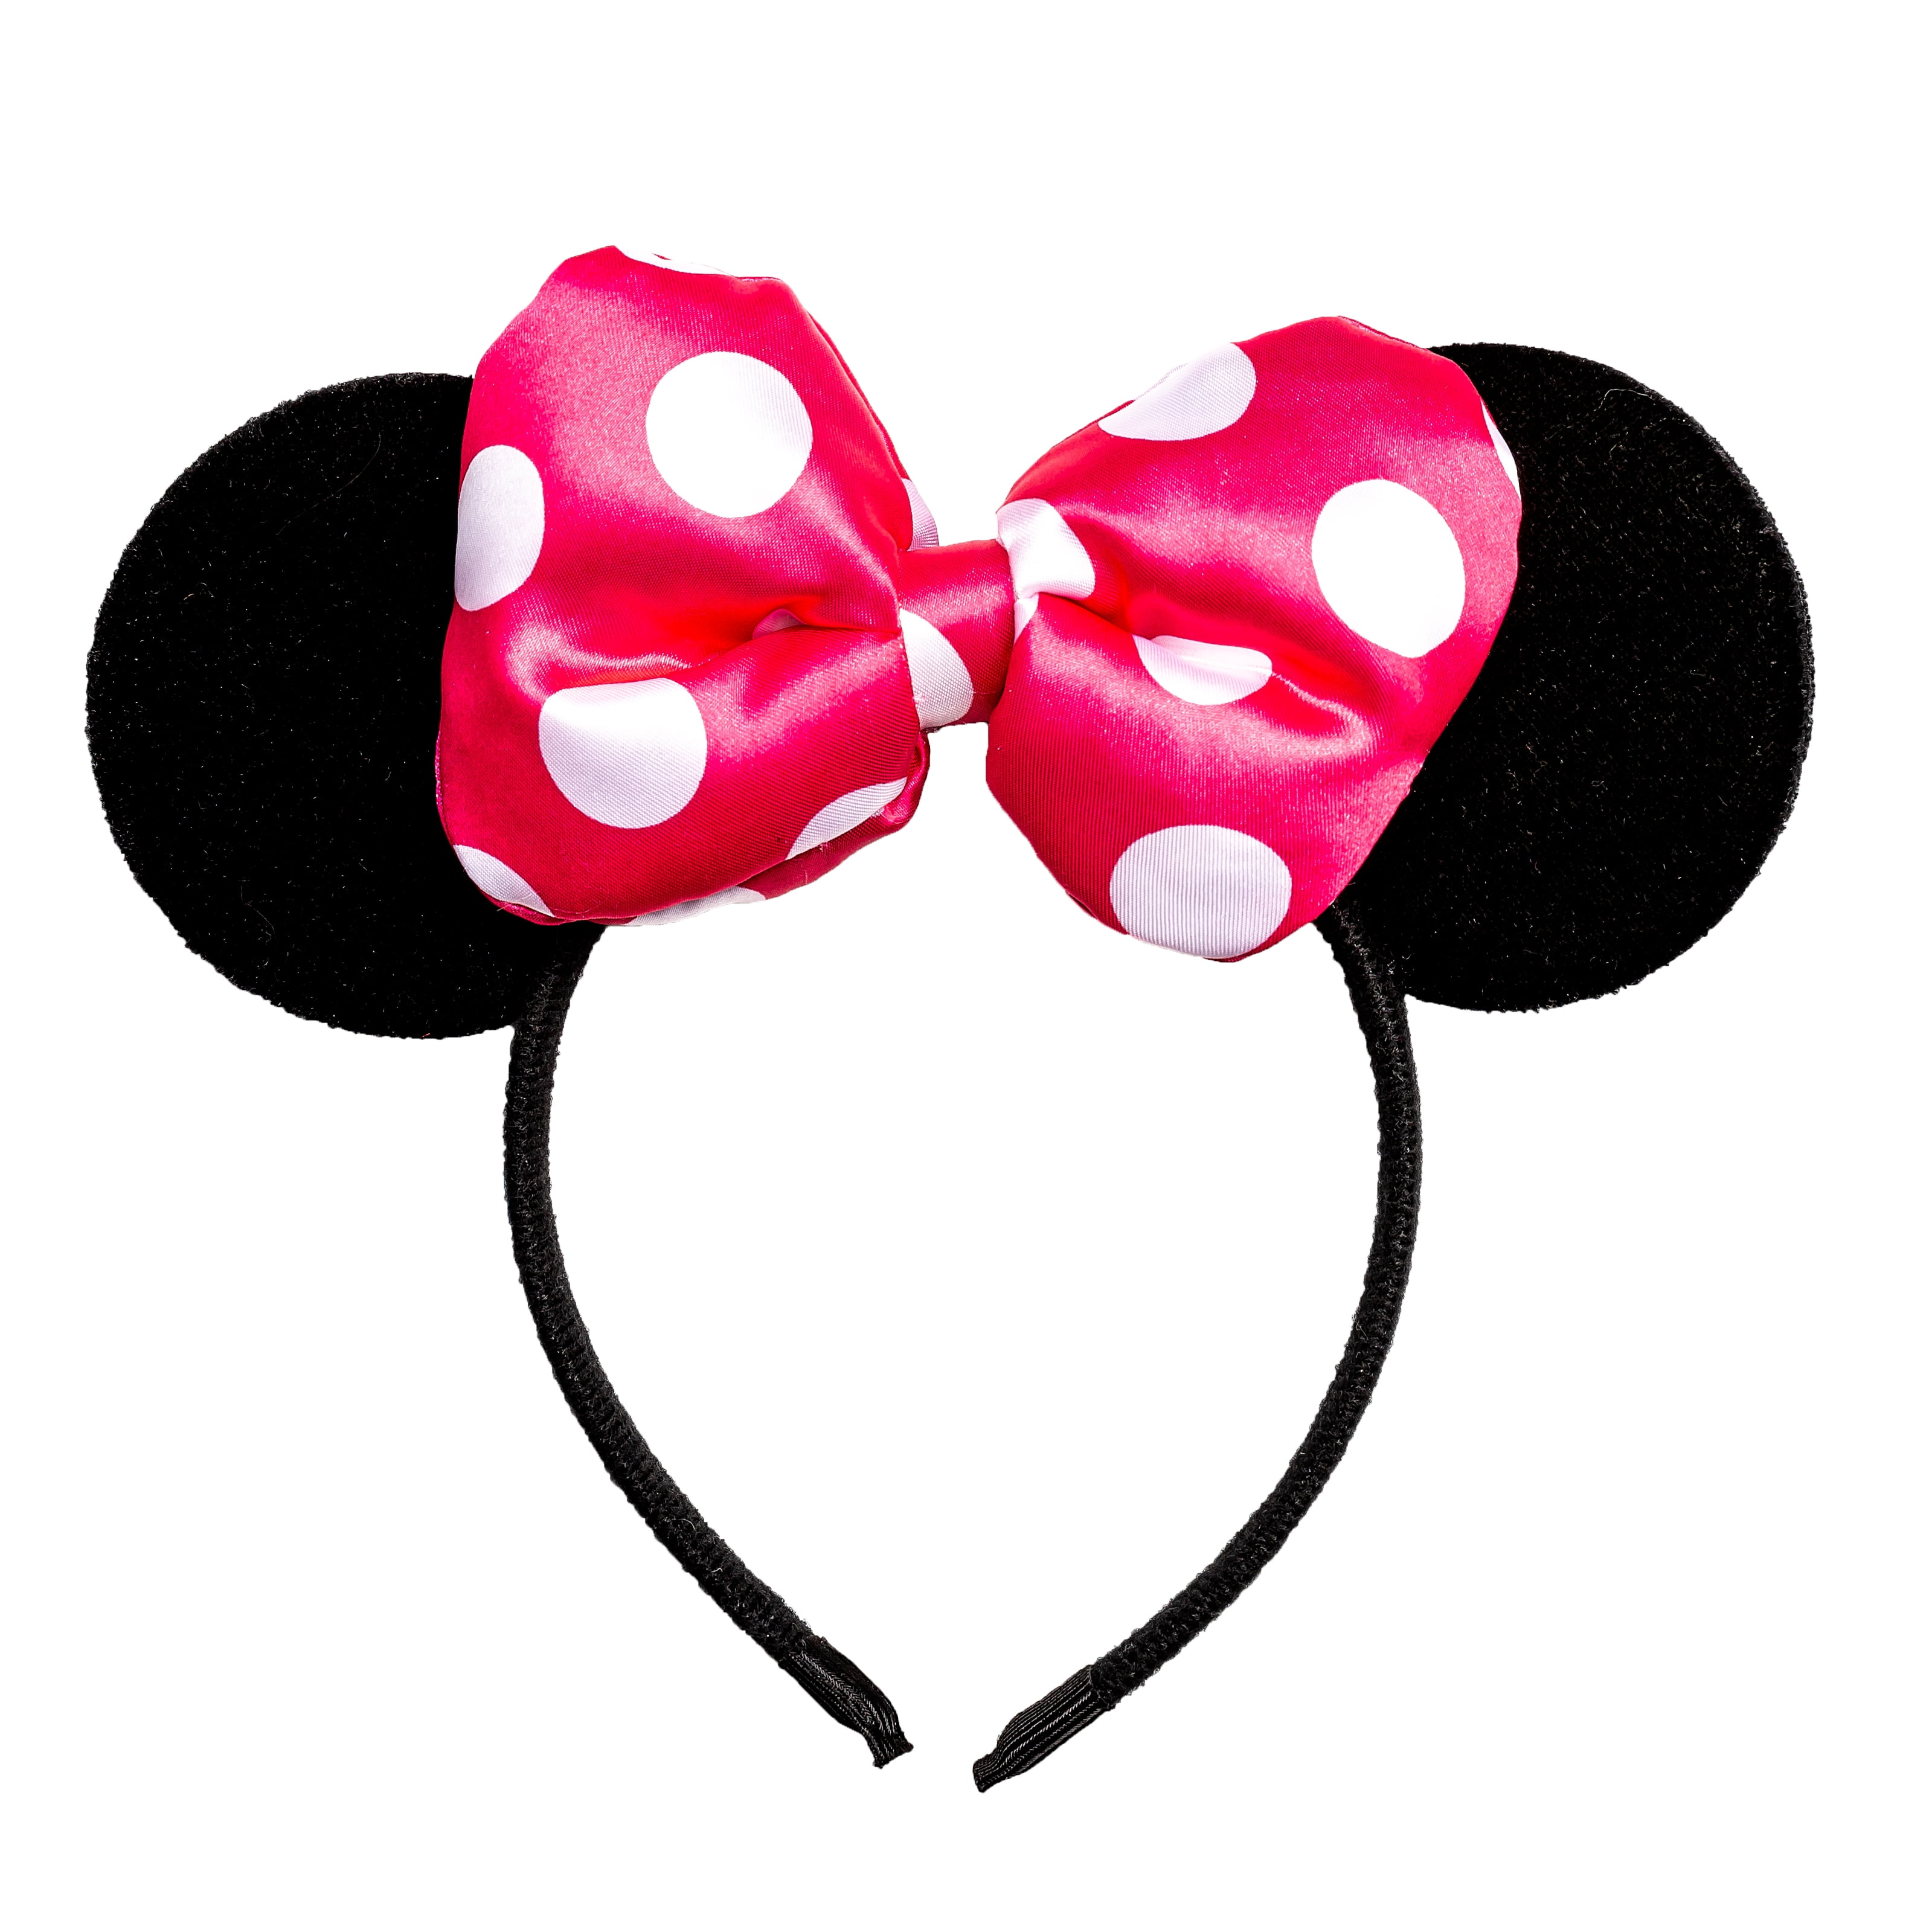 12 Pcs Minnie Mouse Ear Hair Bows Red  Pink Polka Dot Headbands for Girls 